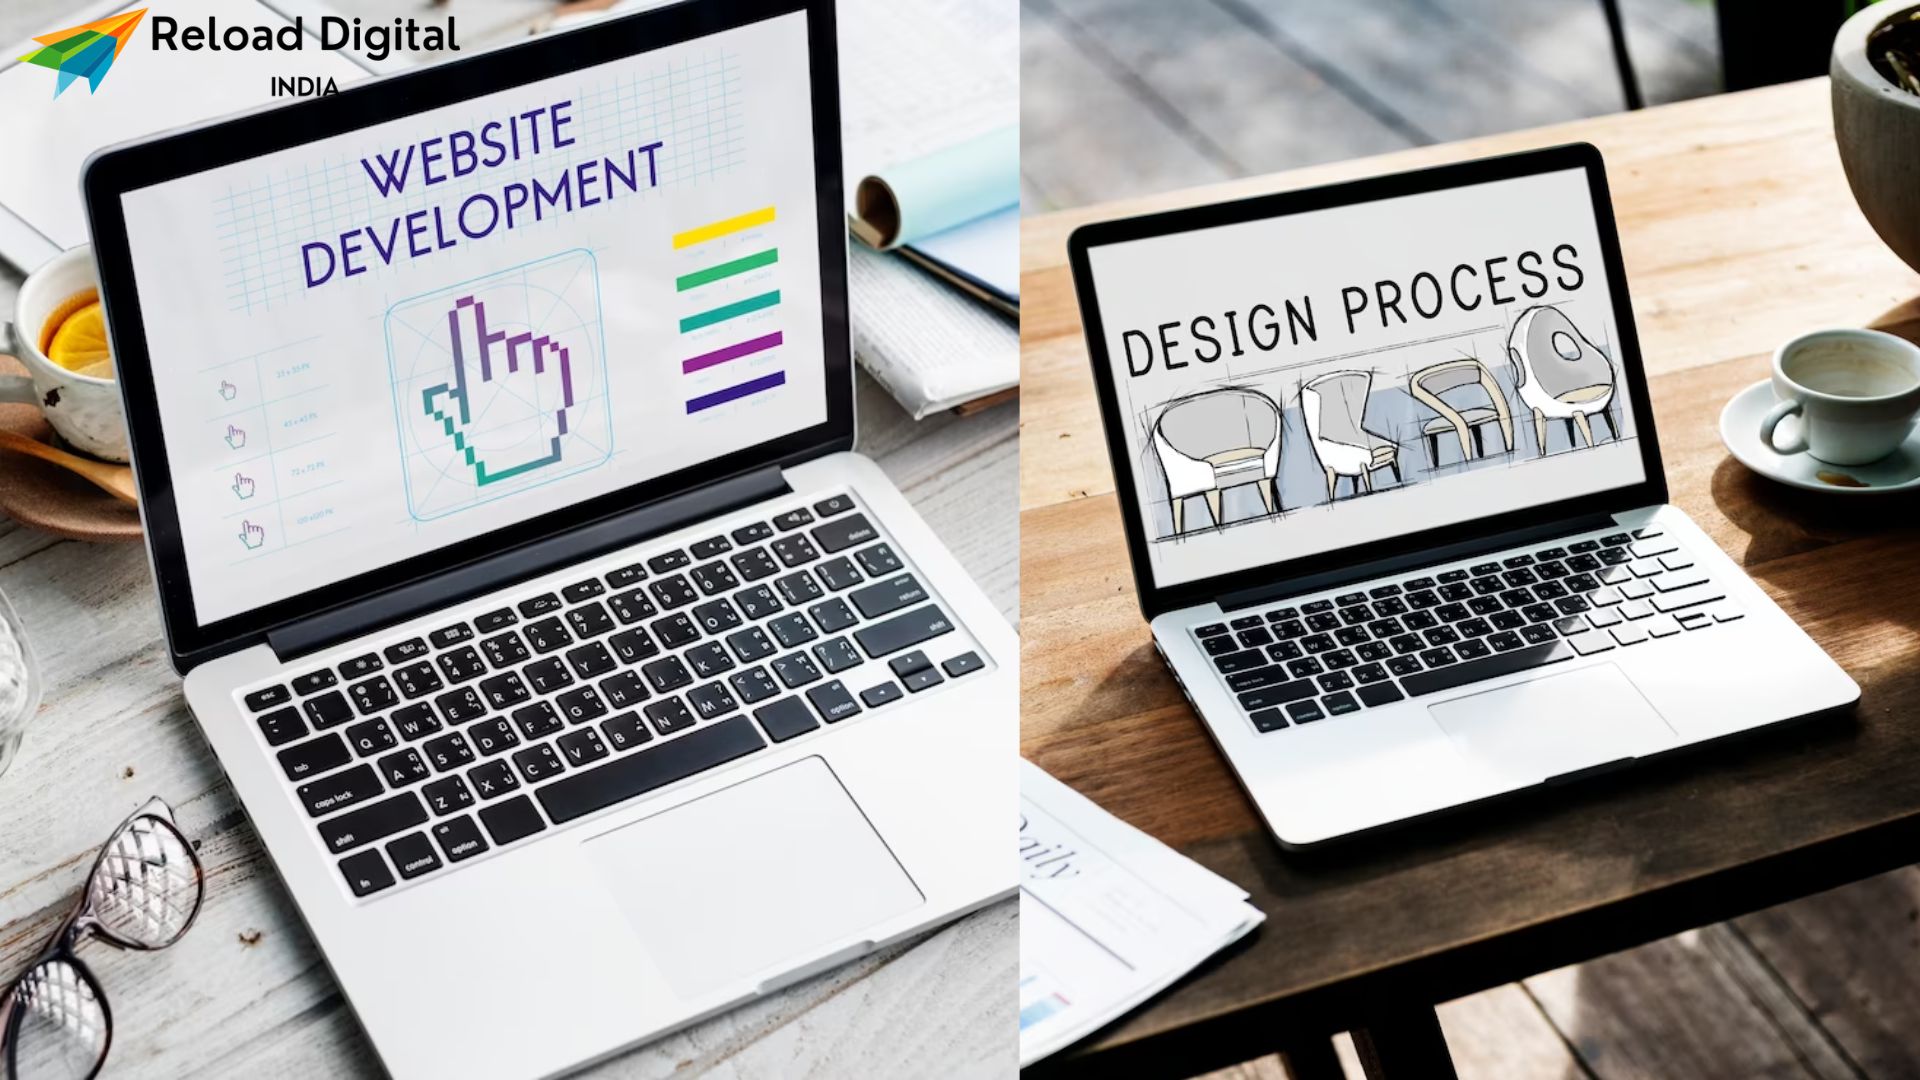 Learn More About Our Website Design Services